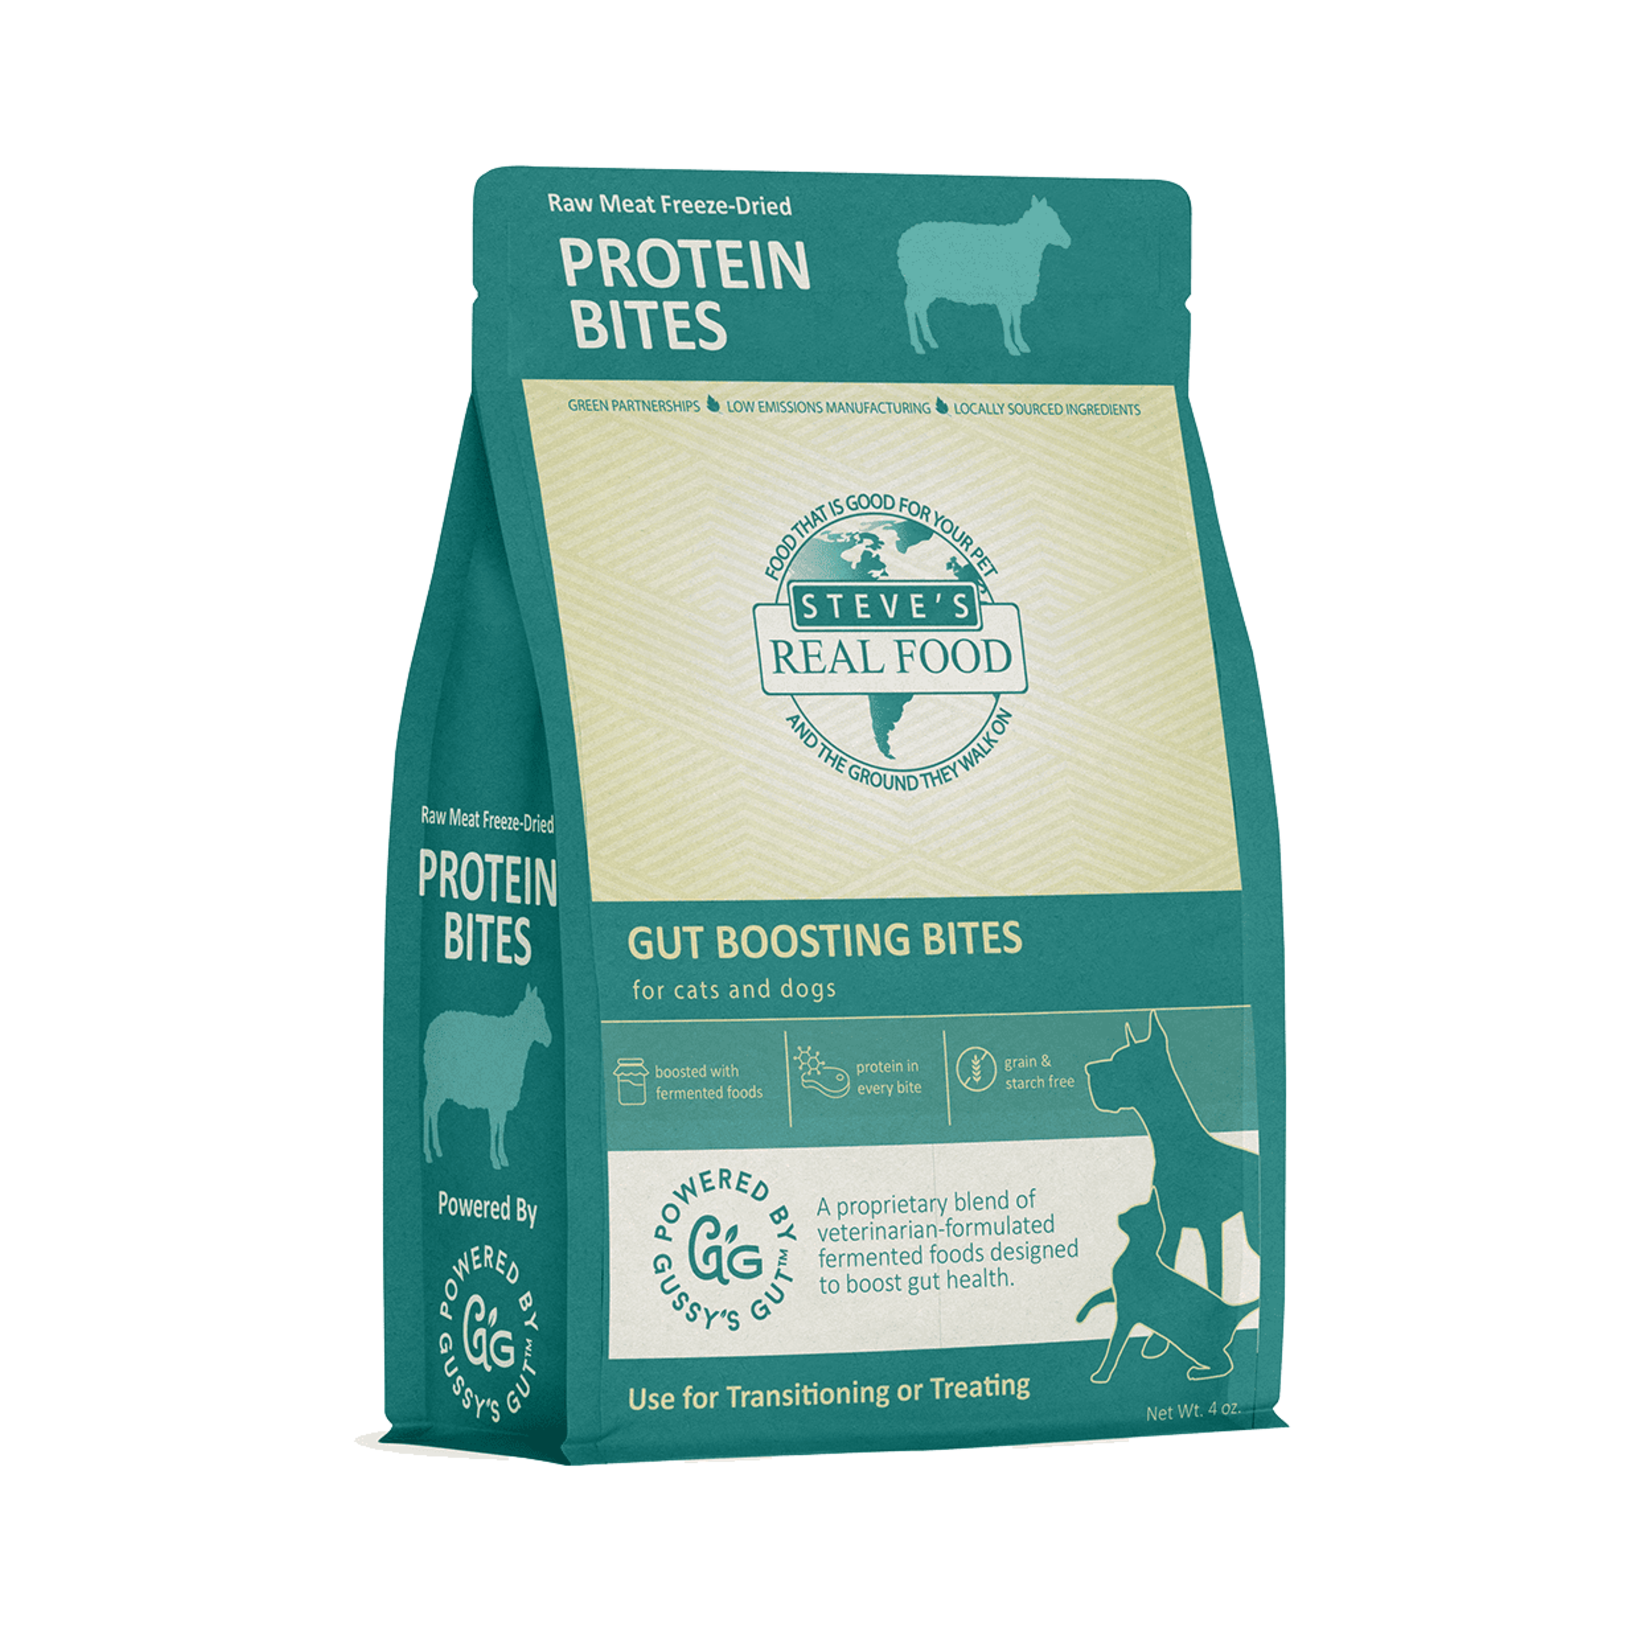 Steve's Real Food Steve's Real Food Protein Bites - Lamb Gut Boosting Bites for Cats & Dogs